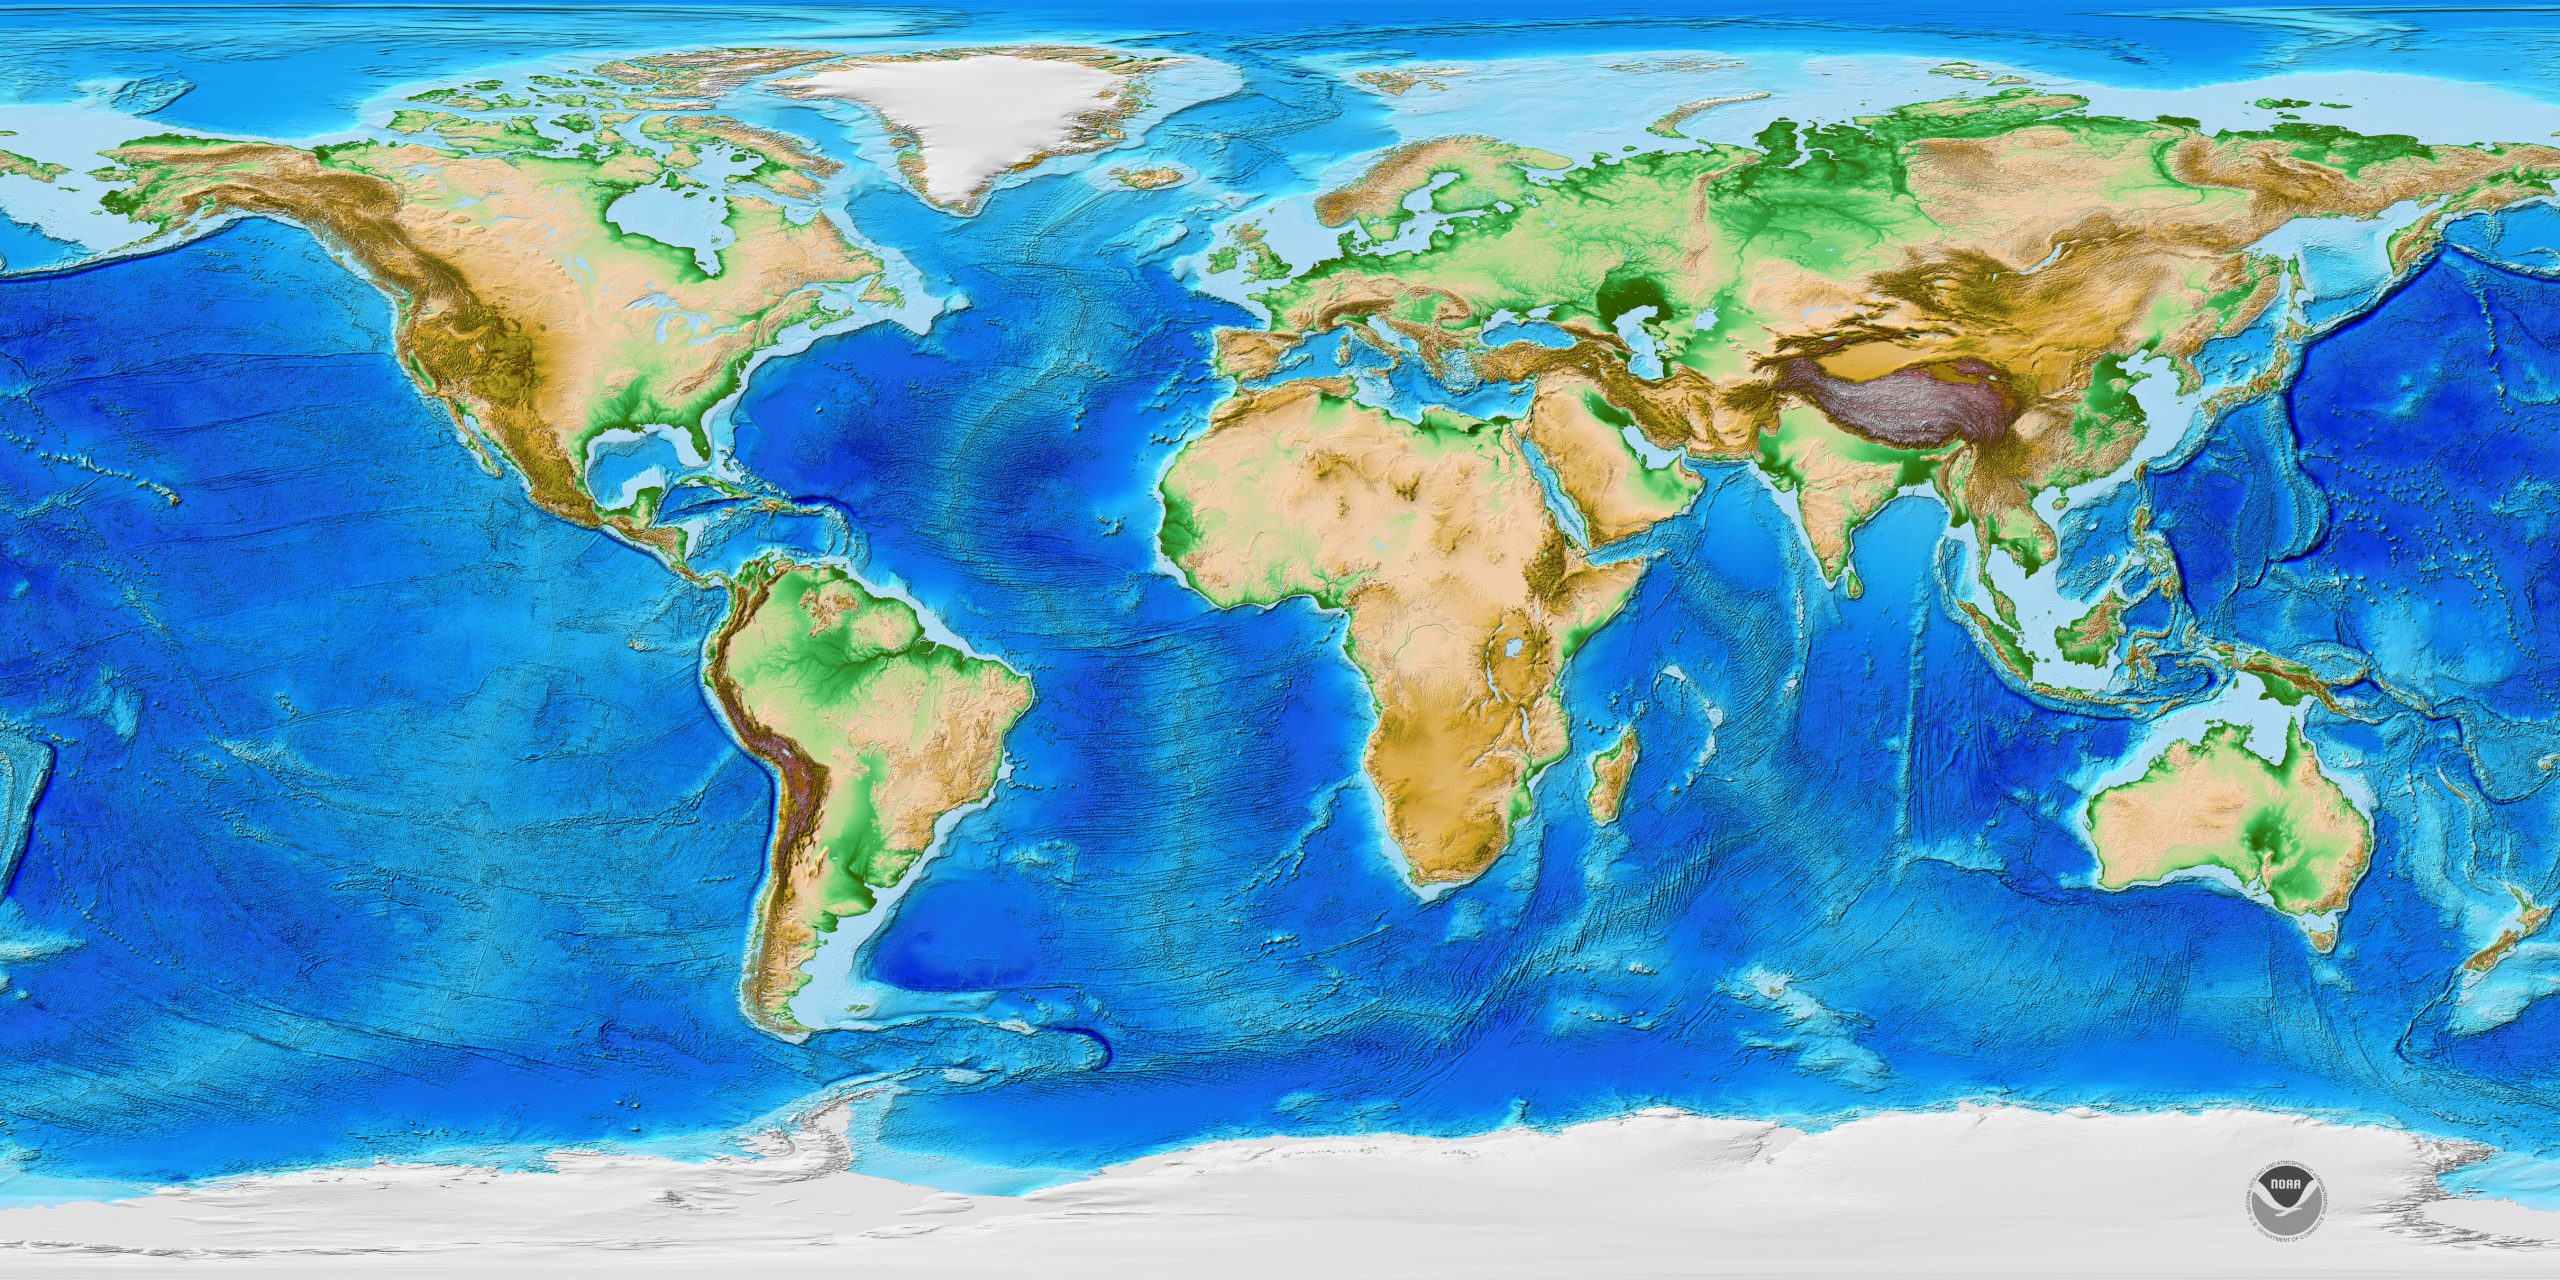 World-Topography-Map-scaled.jpg